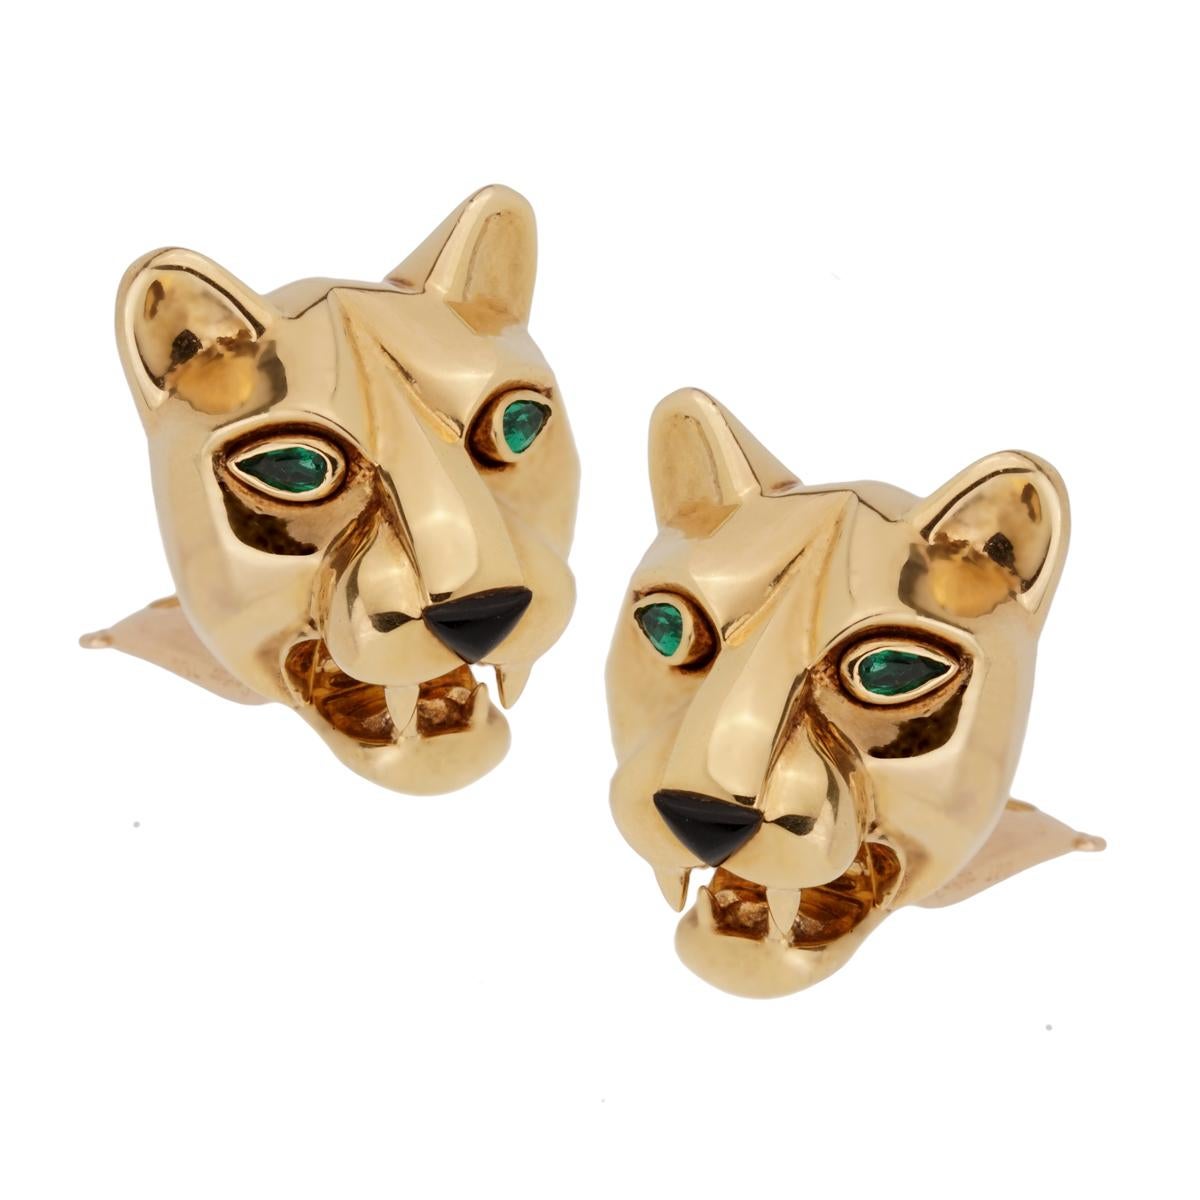 A magnificent pair of Cartier earrings from the iconic Panthere collection featuring Panthere motifs can be transformed into stud earrings. The earrings have a width of .66